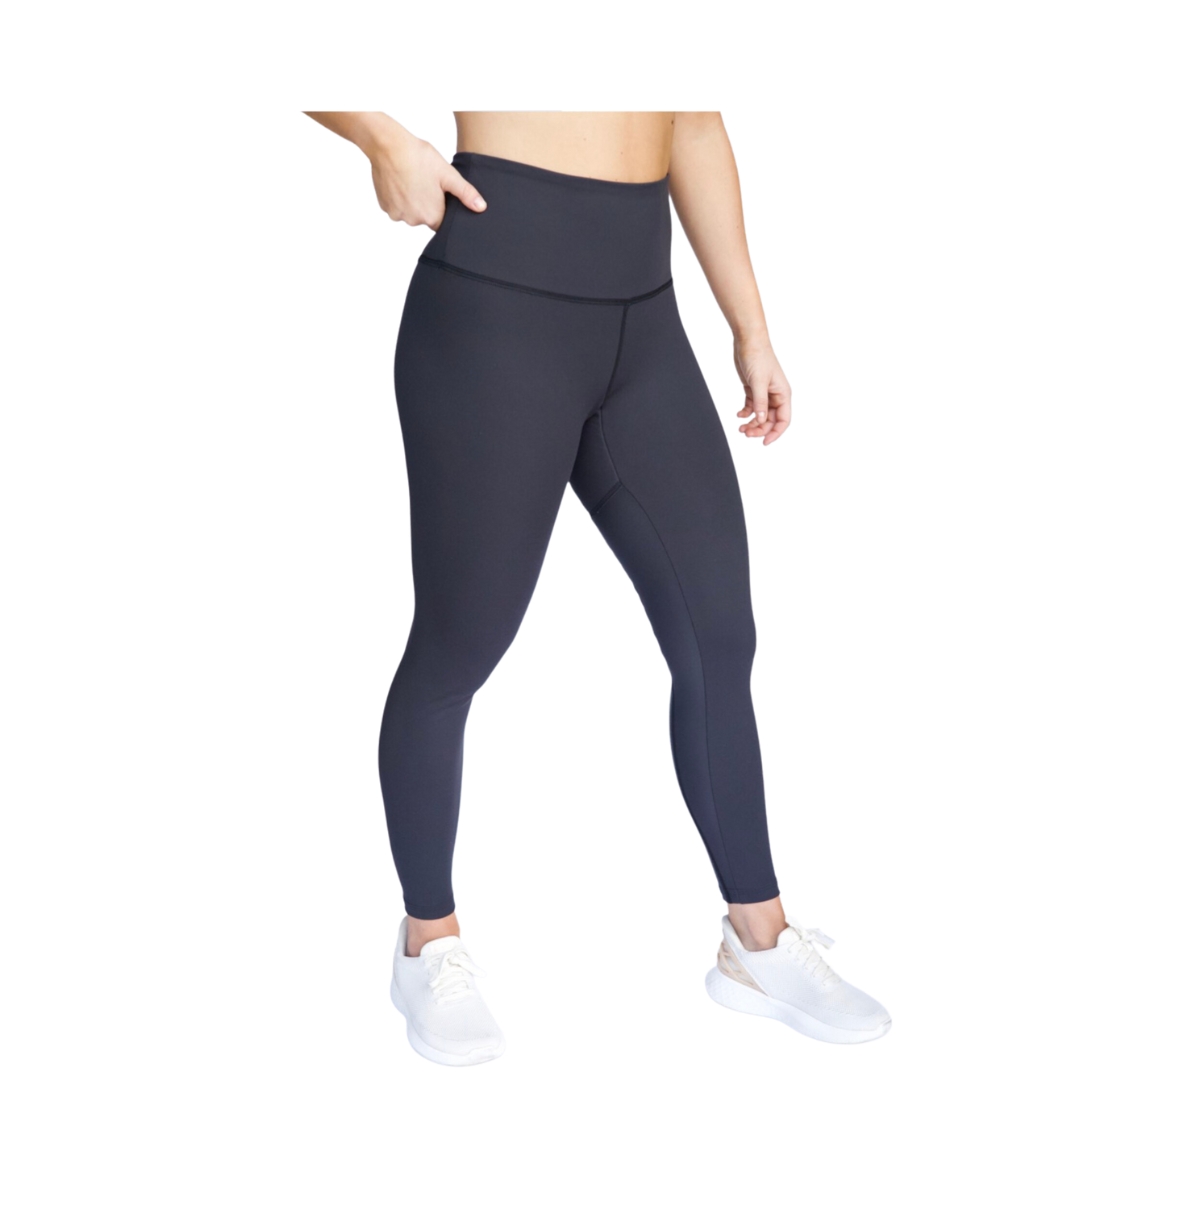 Women's Leakproof Activewear Leggings For Bladder Leaks and Period Protection - Black